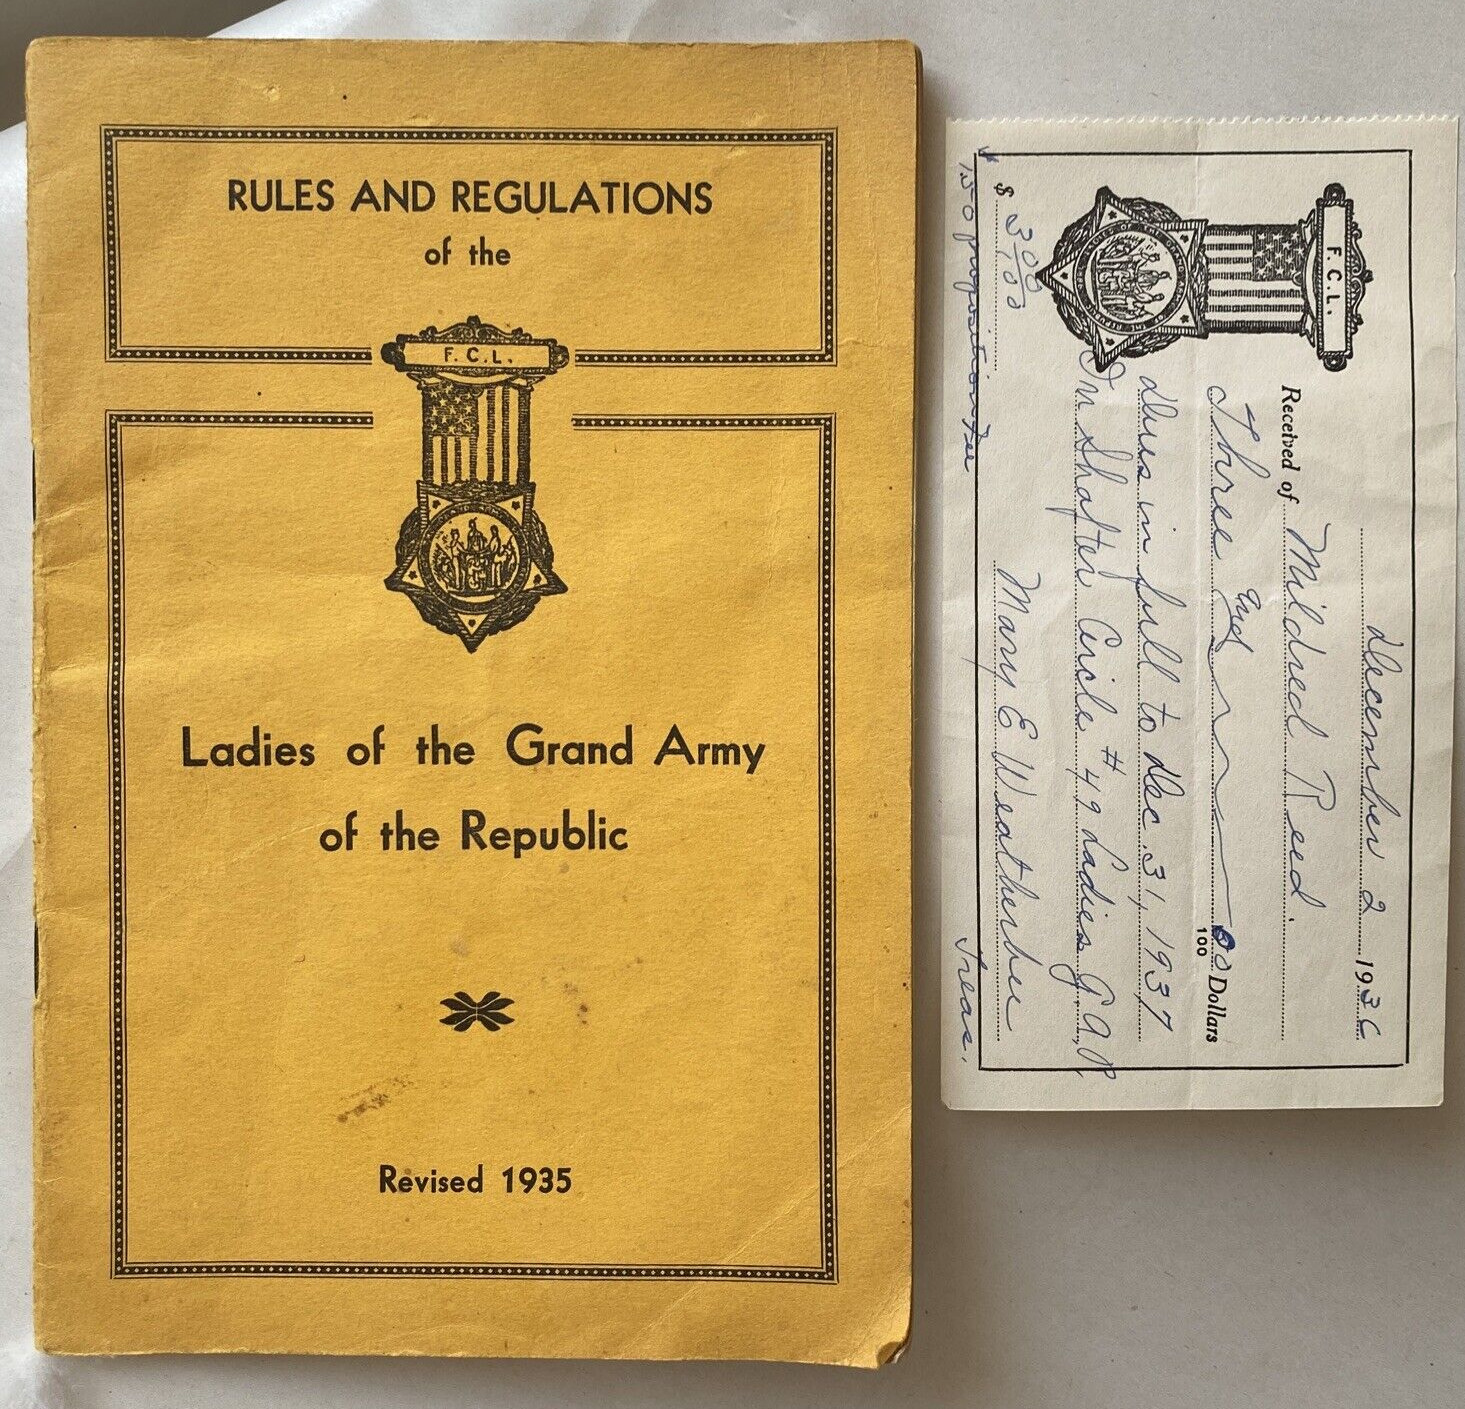 1935 GAR Ladies of the Grand Army of the Republic Rules Regulations Receipt